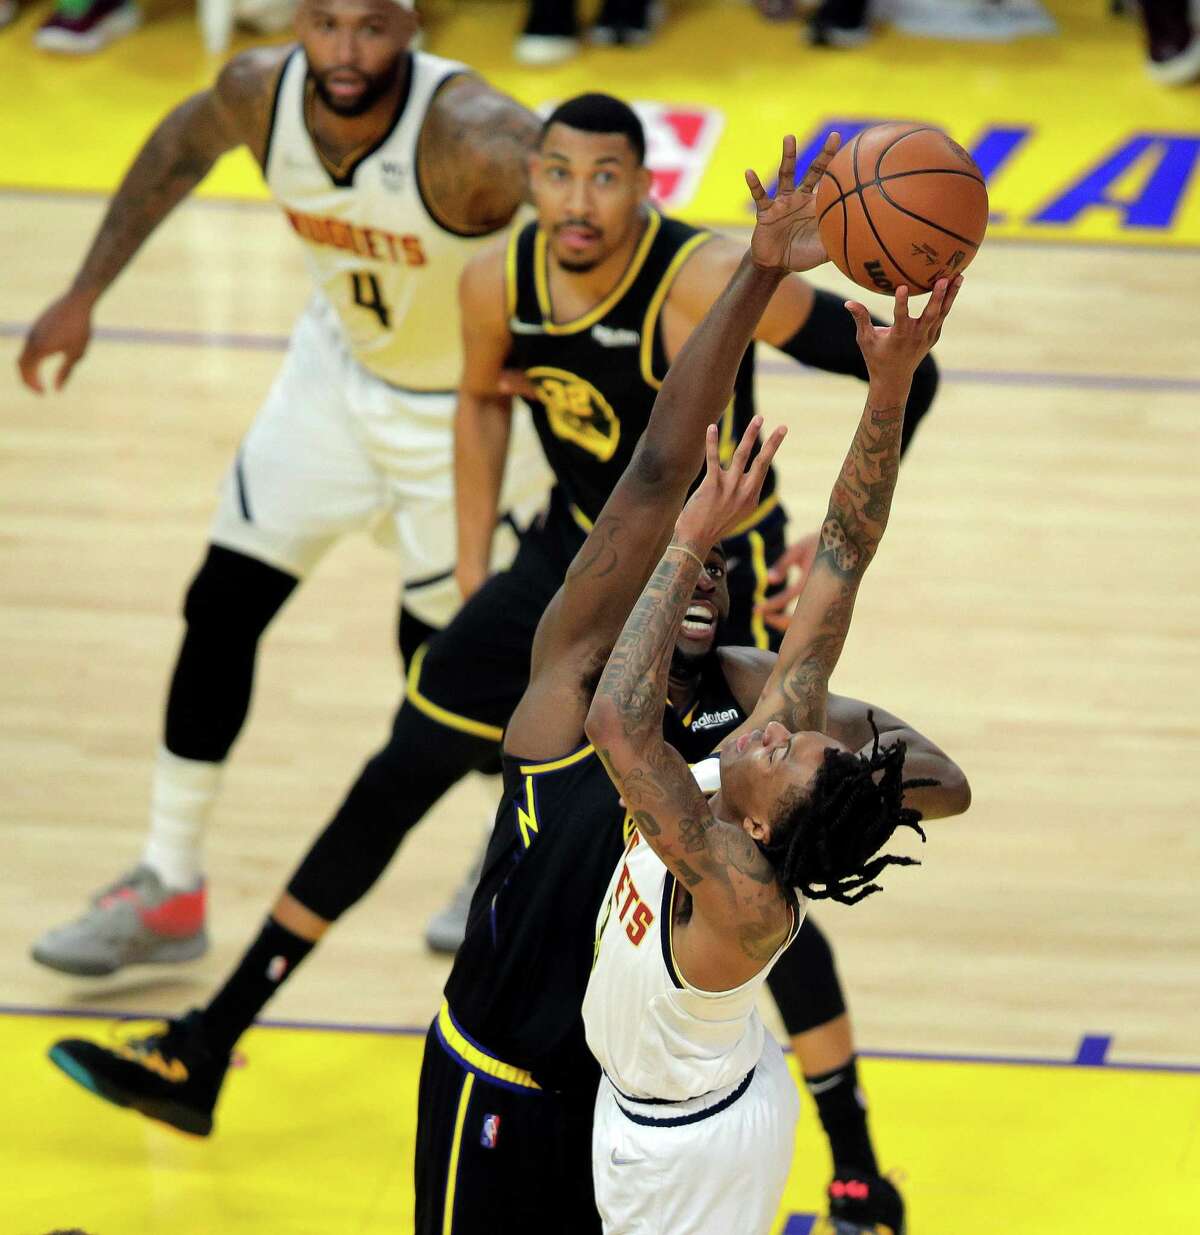 Draymond Green (23) defends against Bones Hylund (3) In the second half as the Golden State Warriors played the Denver Nuggets in Game 5 of the first round of the NBA Playoffs at Chase Center in San Francisco, Calif., on Wednesday, April 27, 2022.